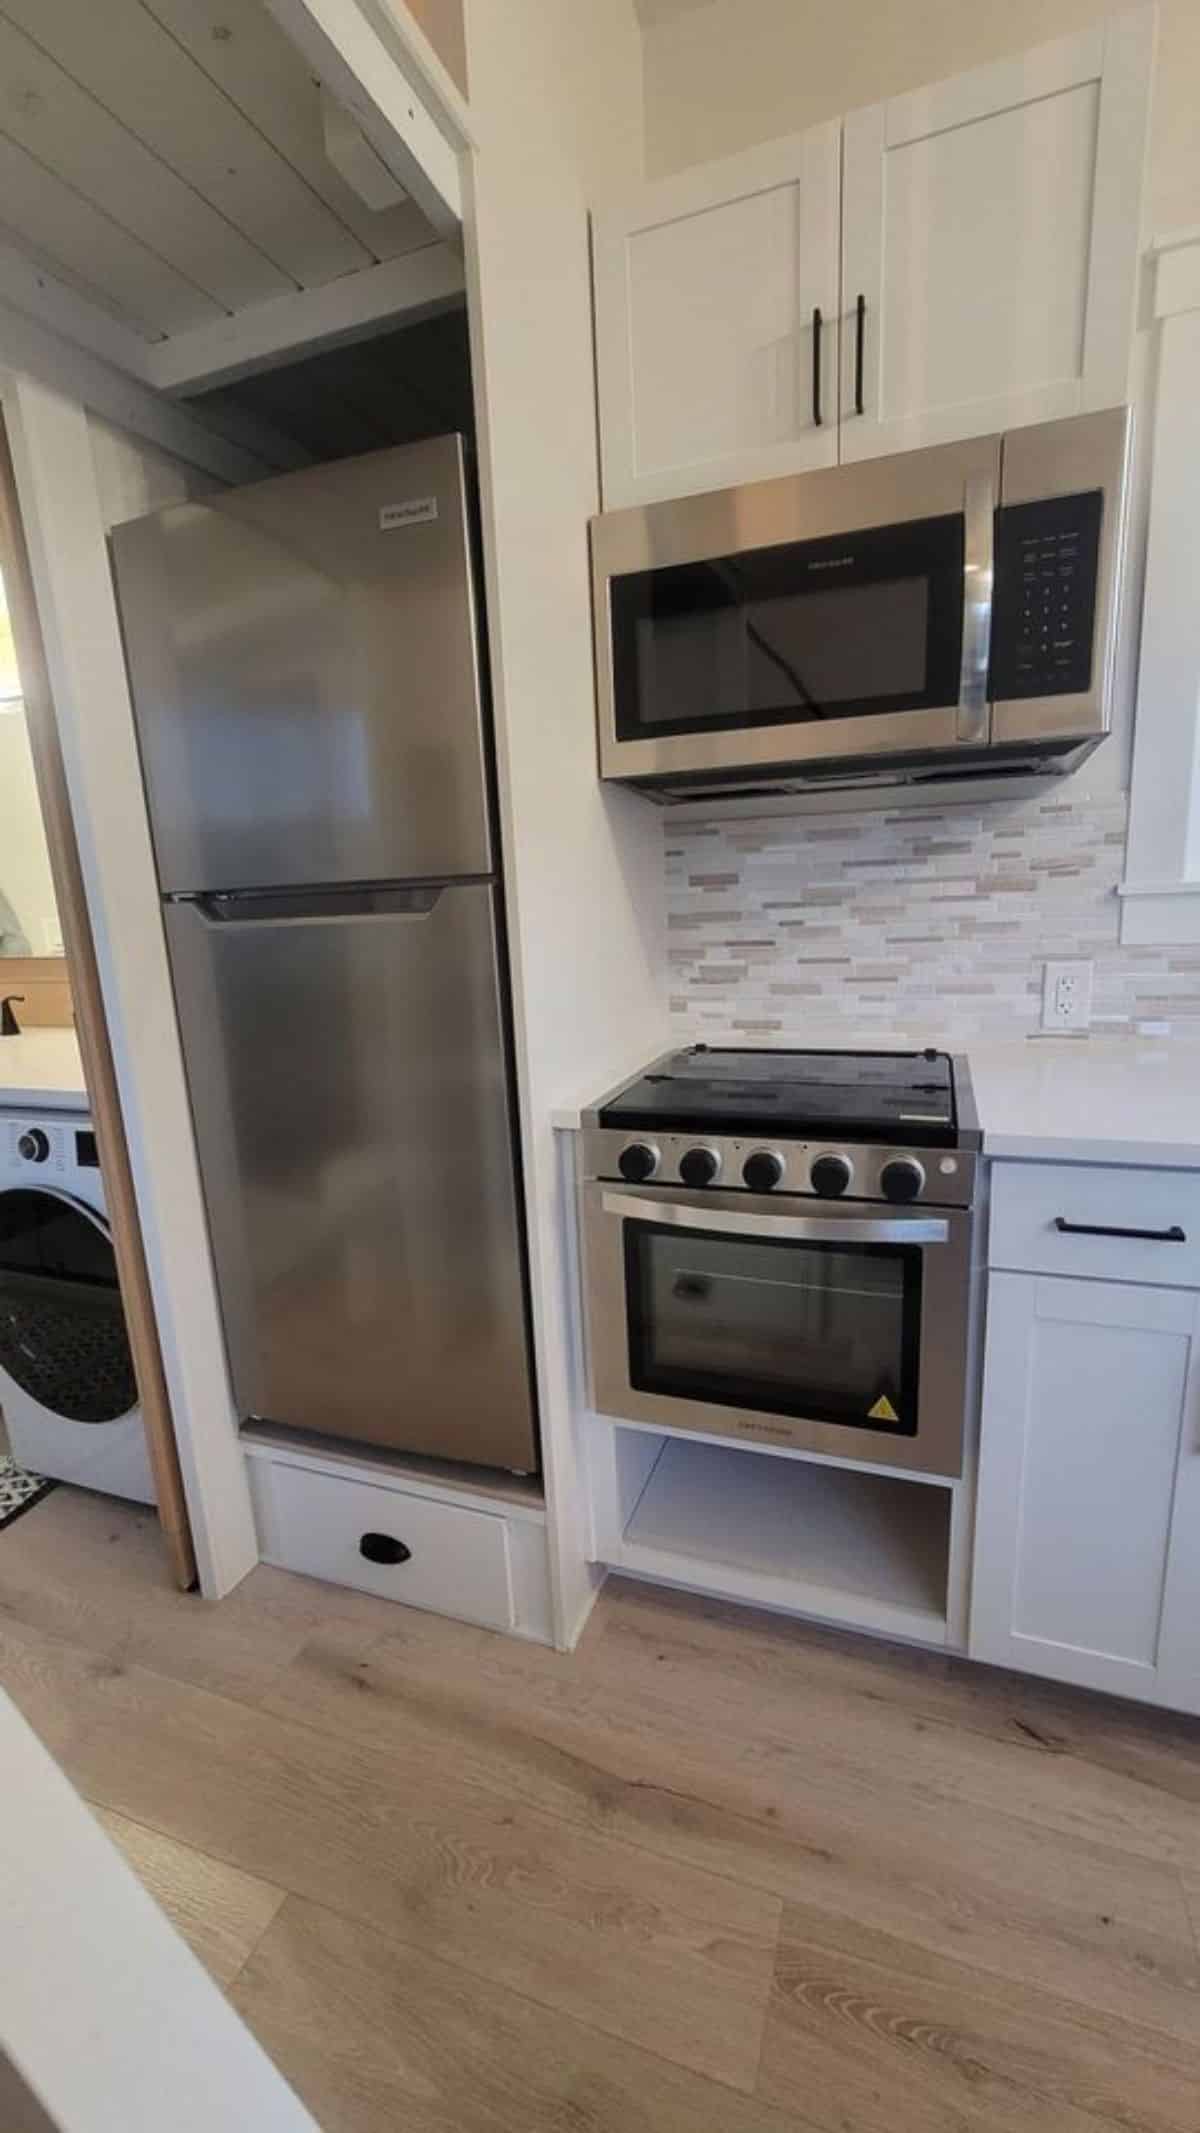 appliances present in the kitchen are all included in the deal